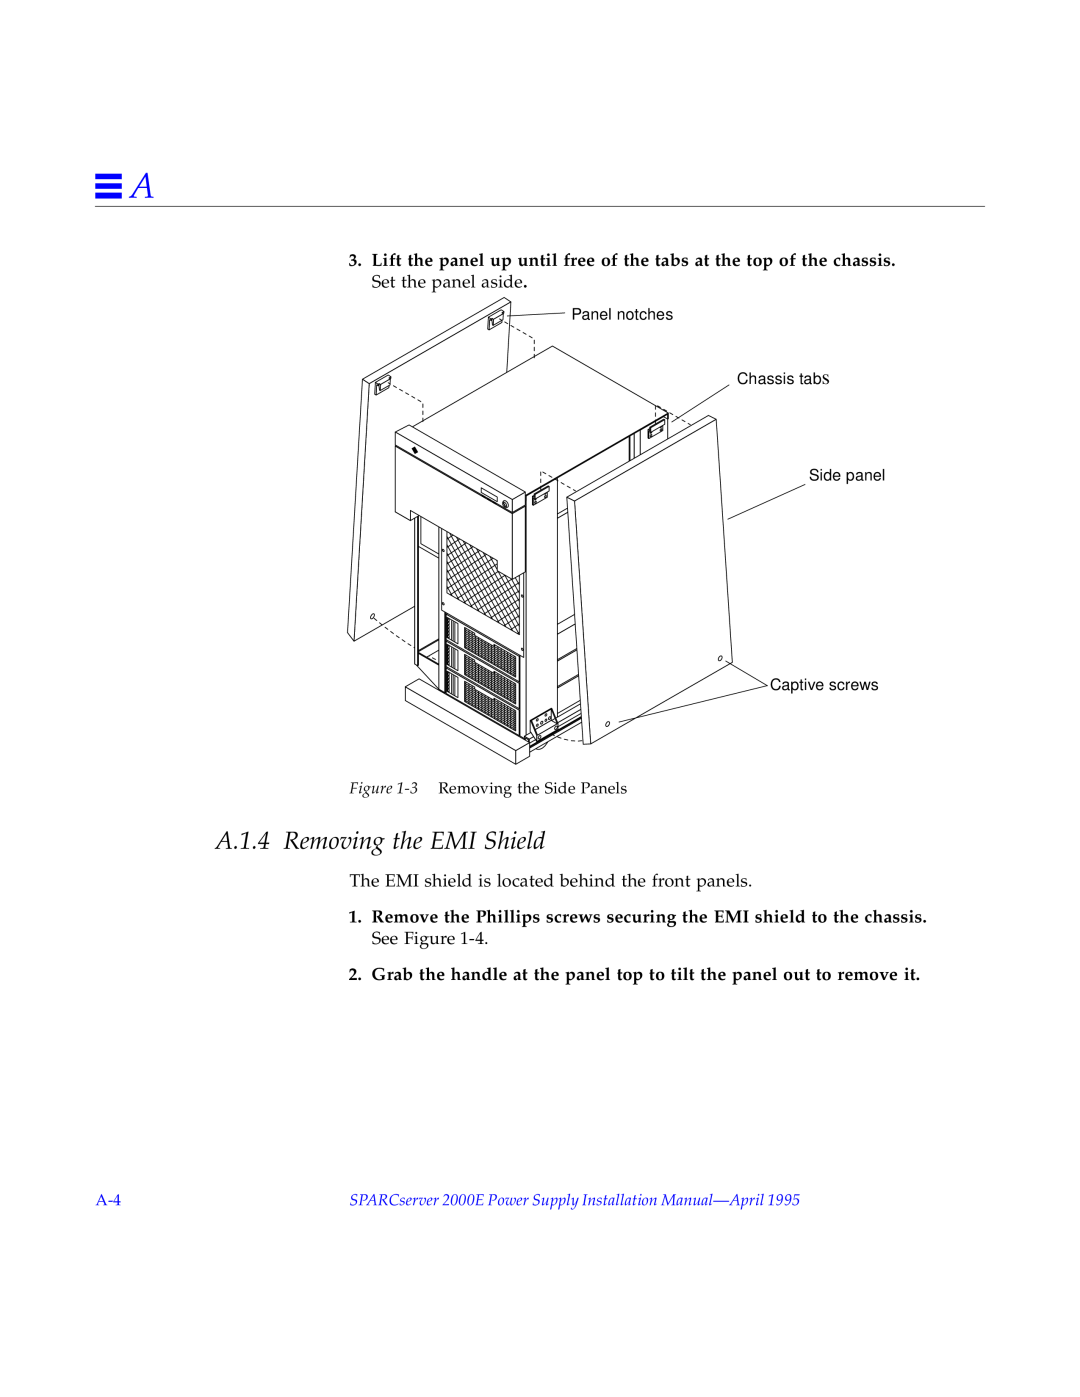 Sun Microsystems 2000E installation manual A.1.4 Removing the EMI Shield, The EMI shield is located behind the front panels 